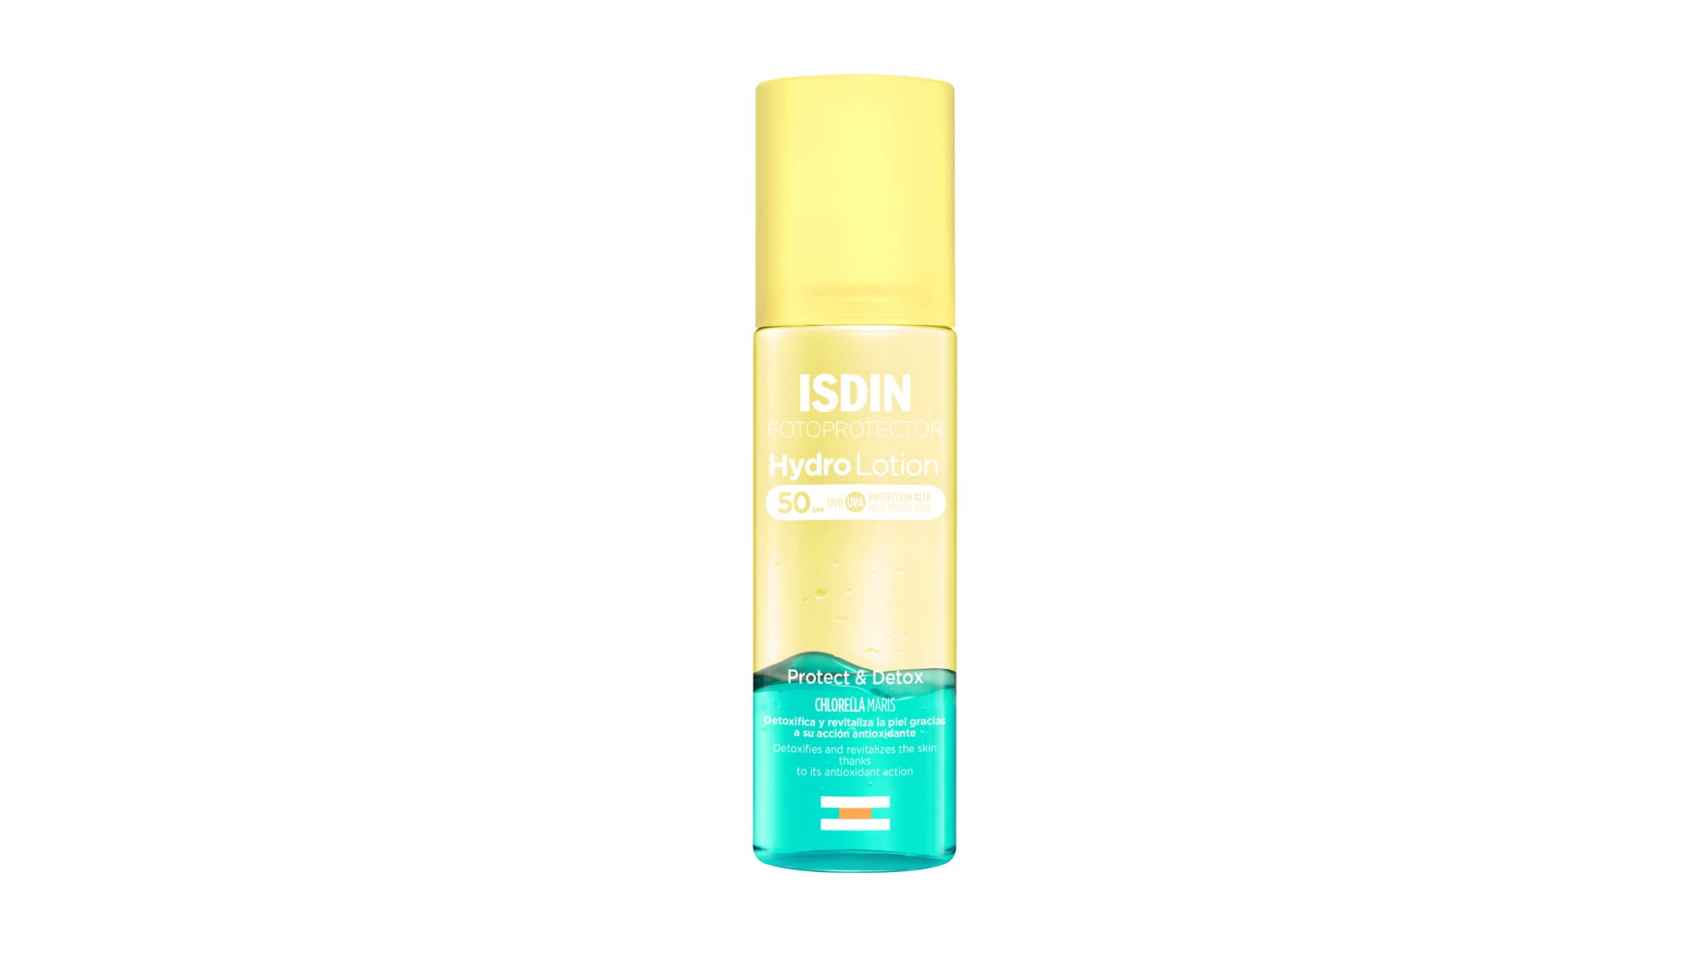 Fotoprotector ISDIN HydroLotion SPF 50